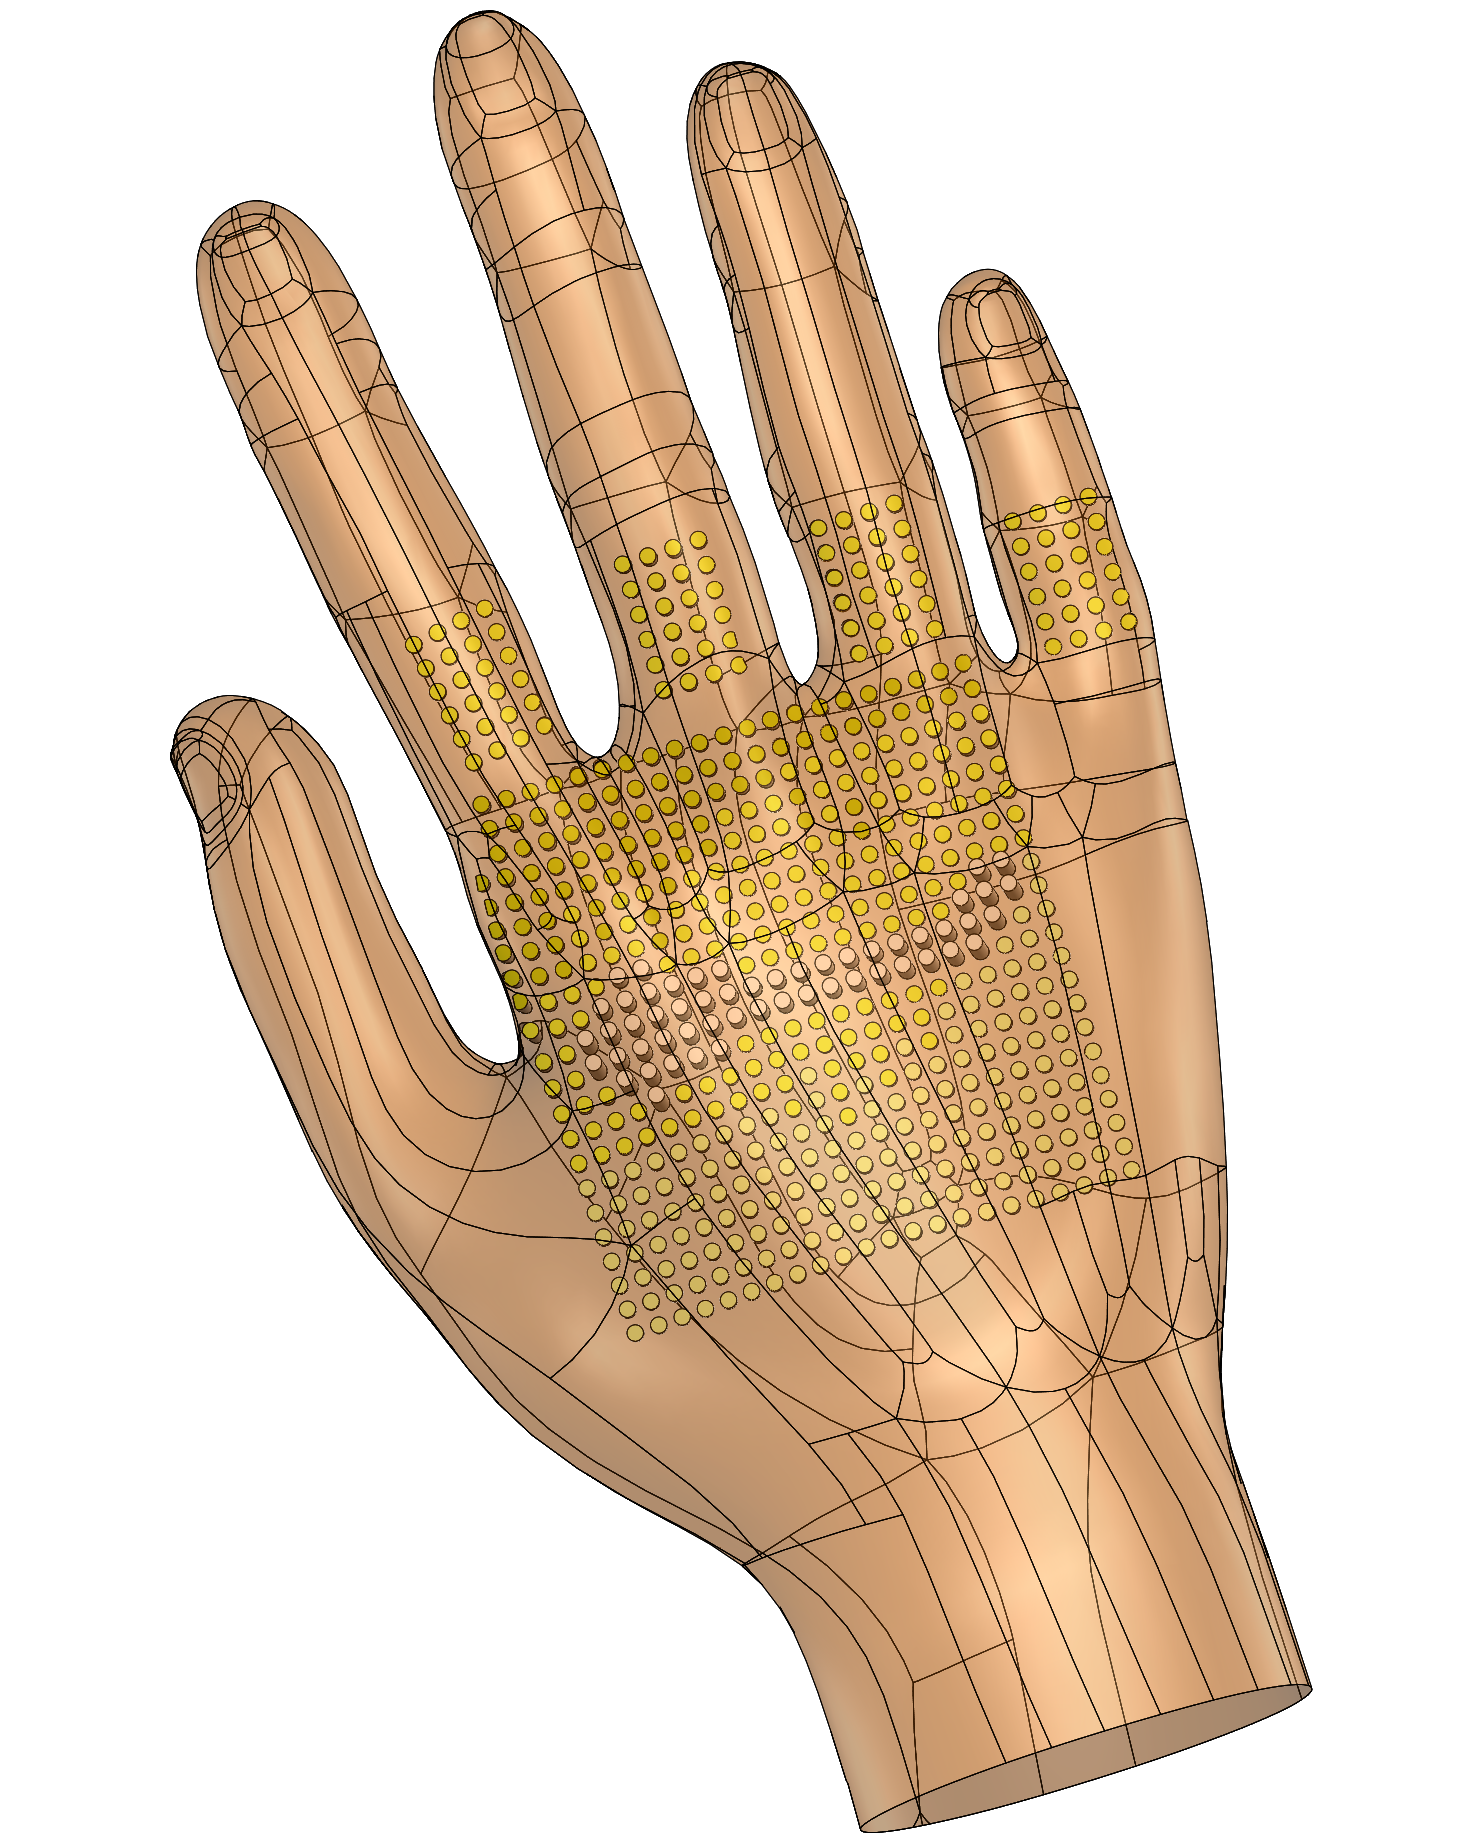 An array of small, cylindrical pins prompts users to position their hand to grasp a desired object. The photo shows a graphic image of the glove's technology. Yellow dots represent the cylindrical pins. There is a square patch on the palm of yellow dots and additional ones on the finger.